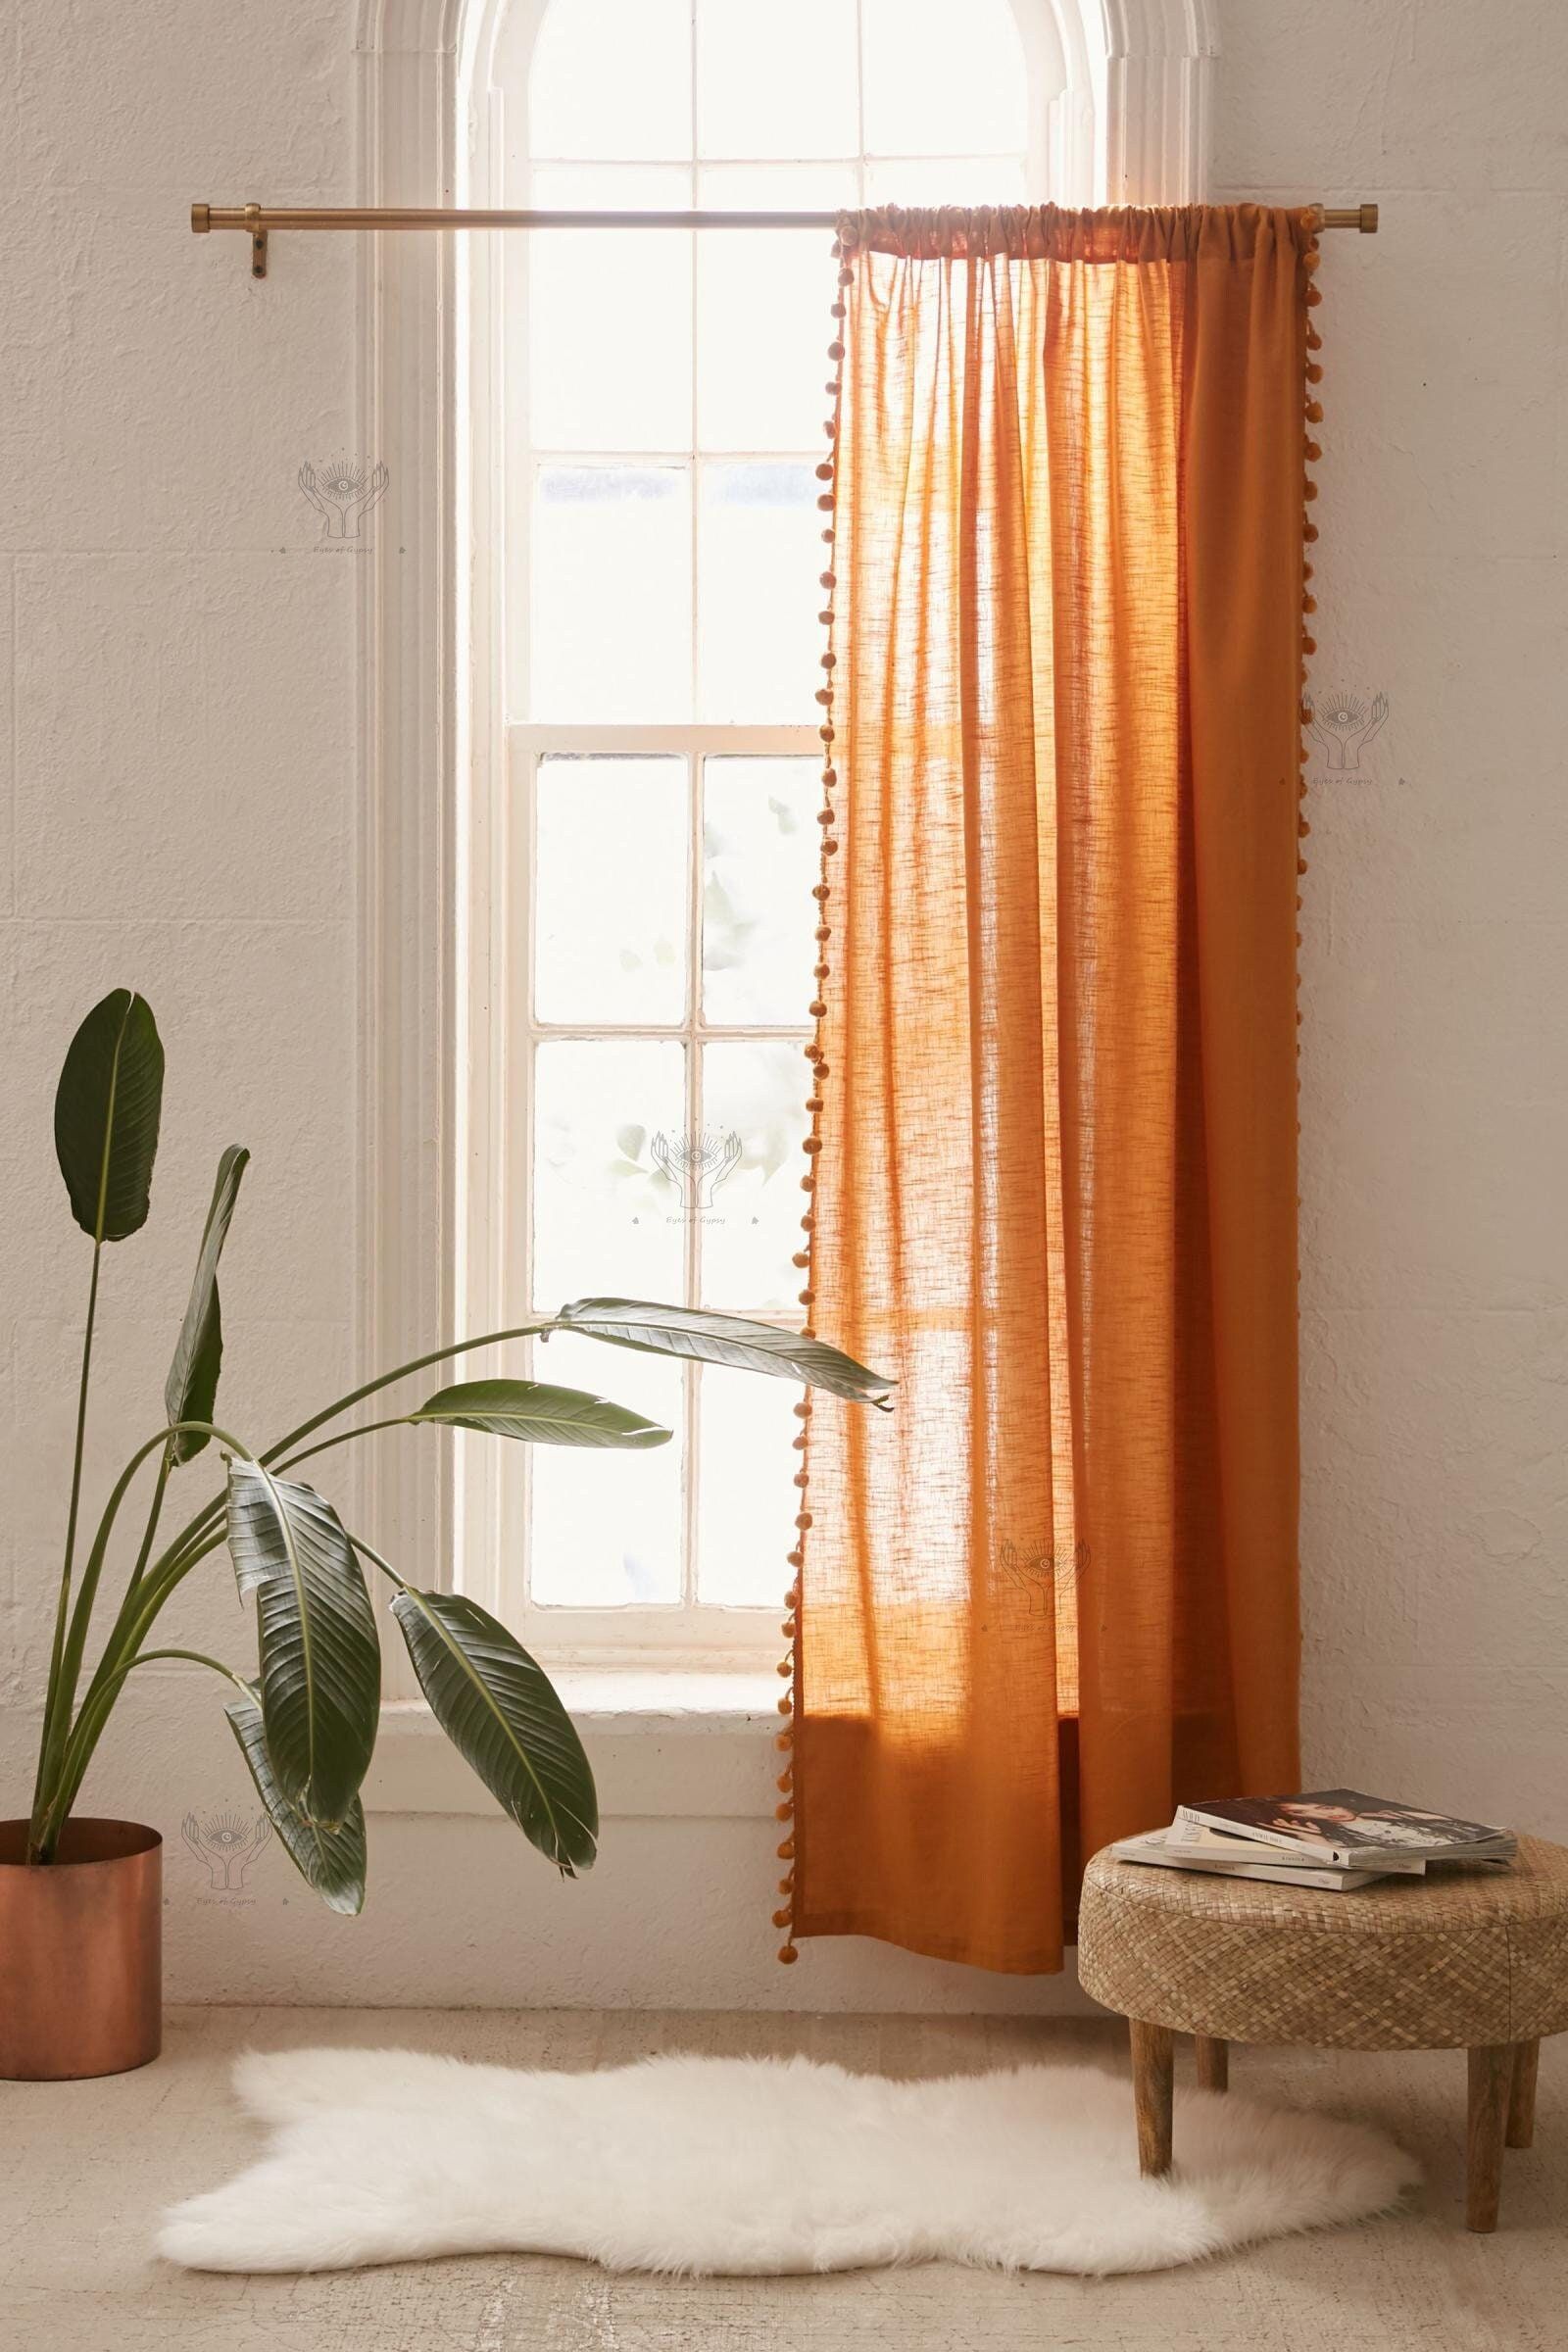 Add a Pop of Color with Orange Curtains